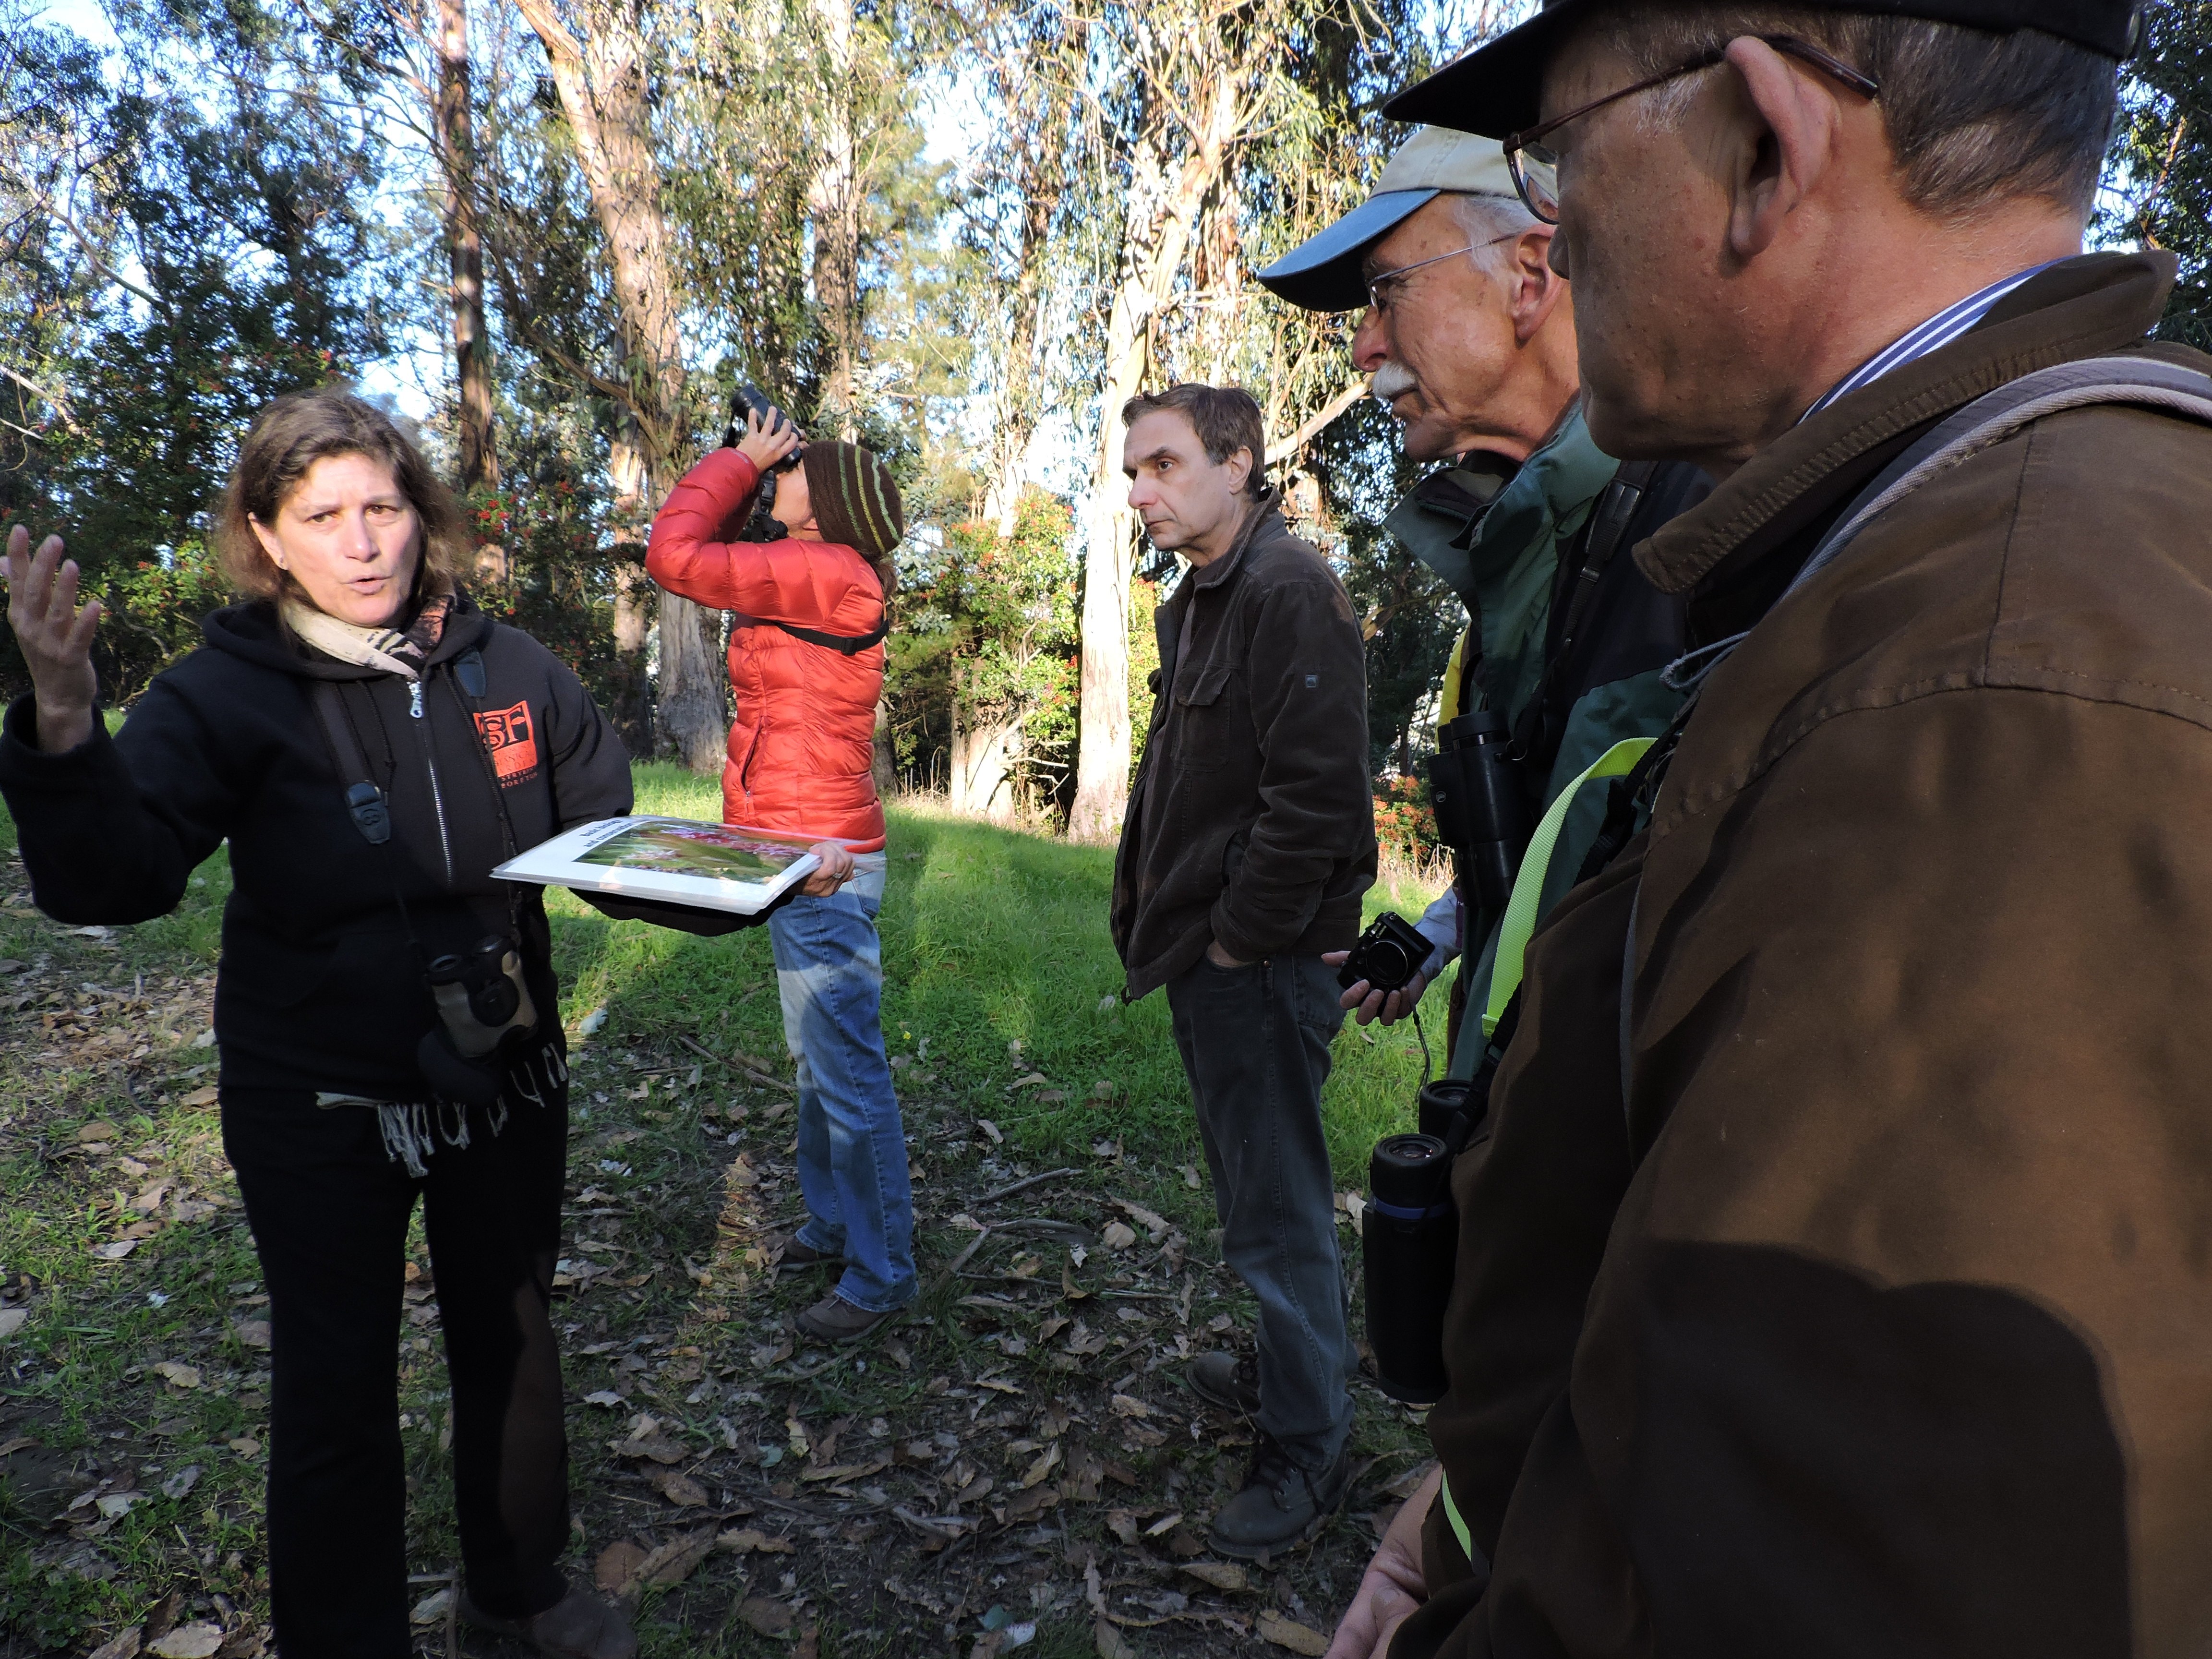 A woman in a dark coat (left) speaks to an assembled group of volunteers (right) in a wooded setting.